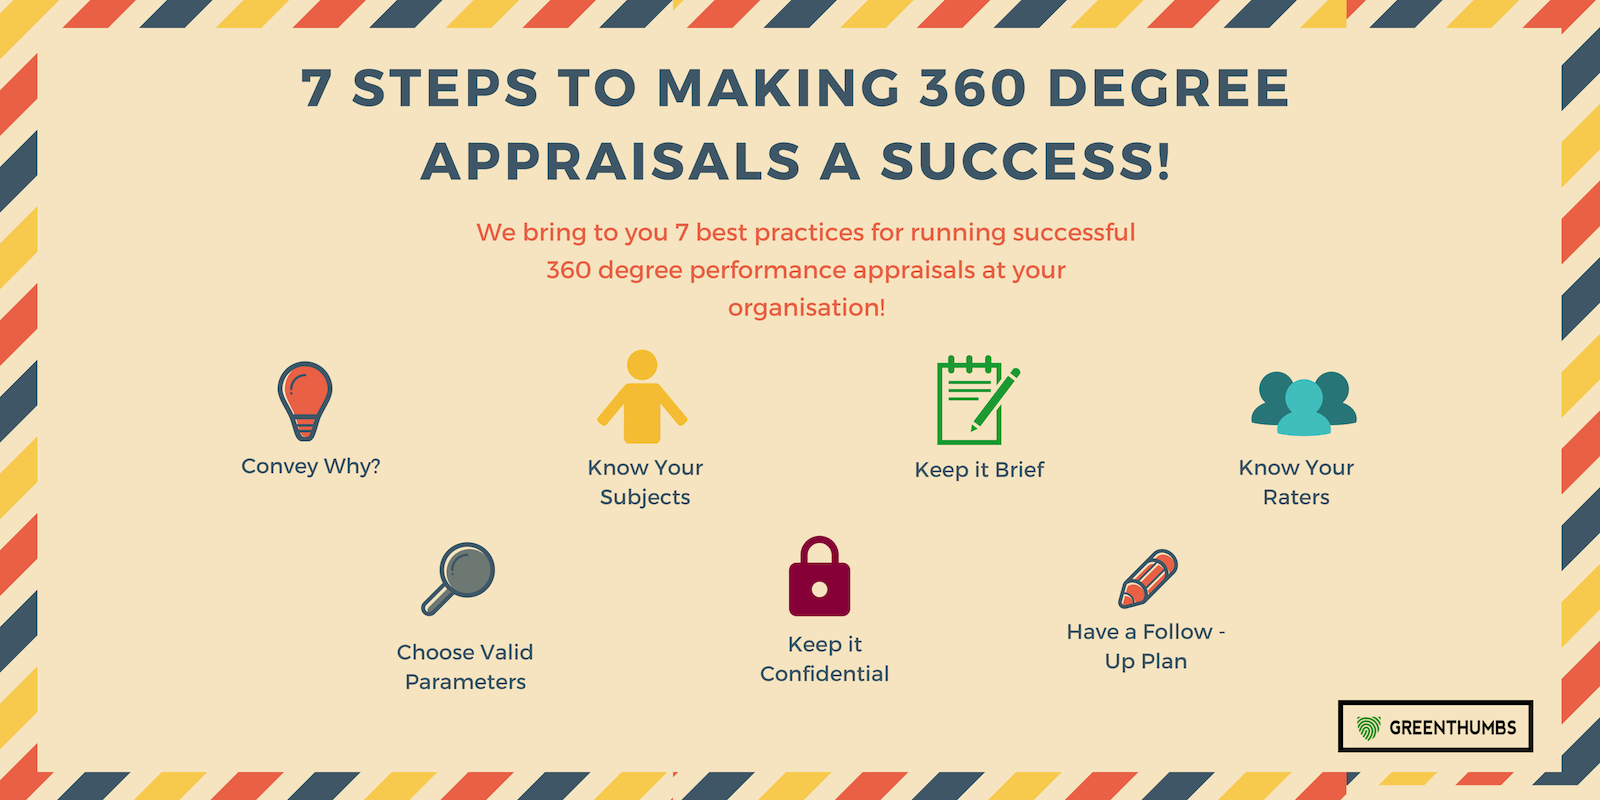 7 steps to making 360 Degree Appraisals a success!